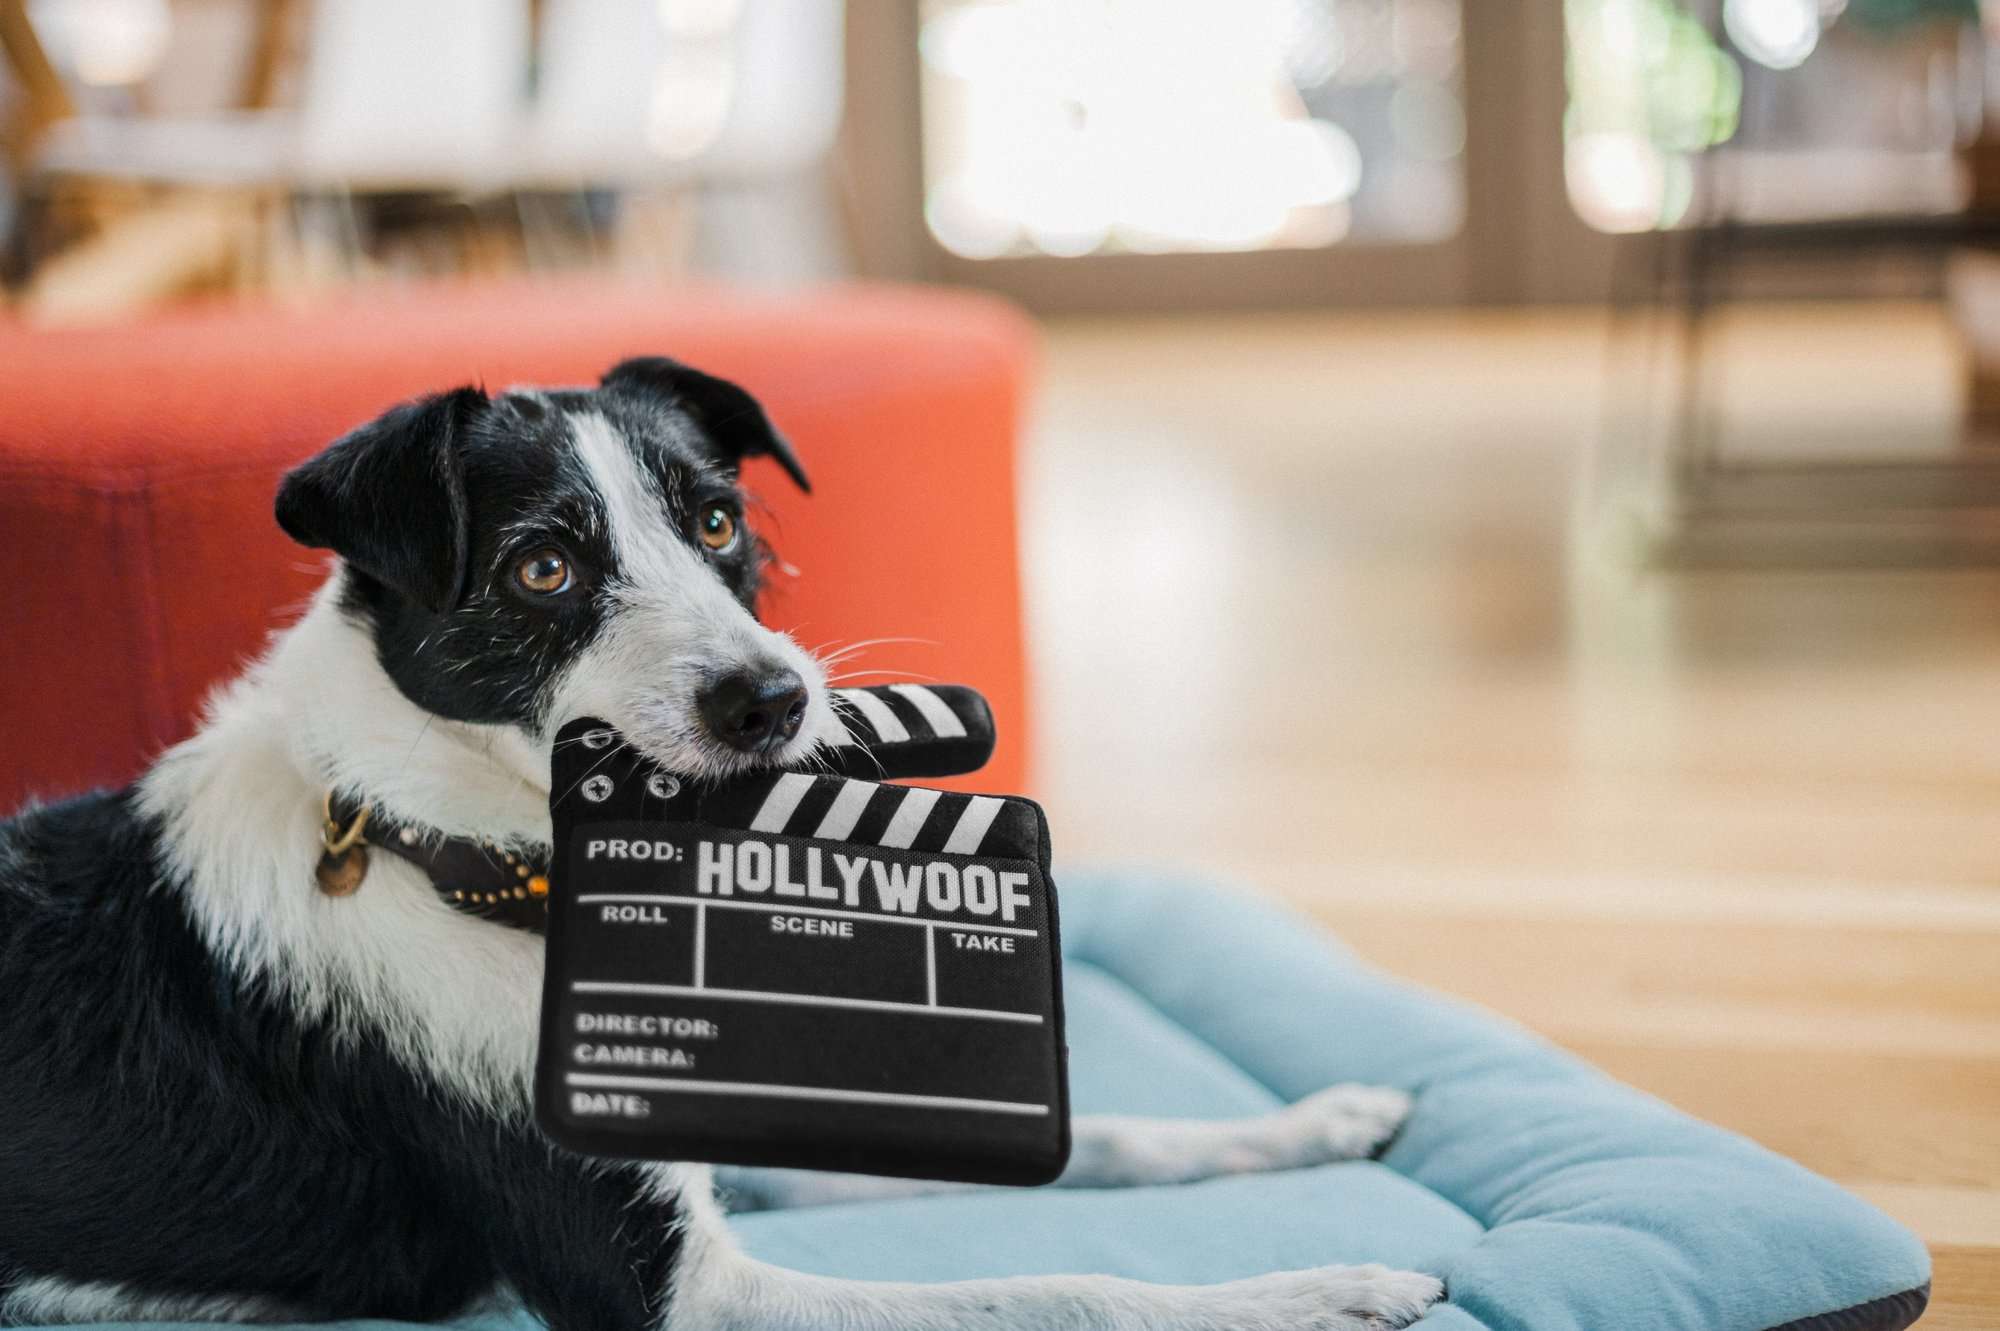 PLAY Hollywoof Doggy Director Board Jouet pour chien